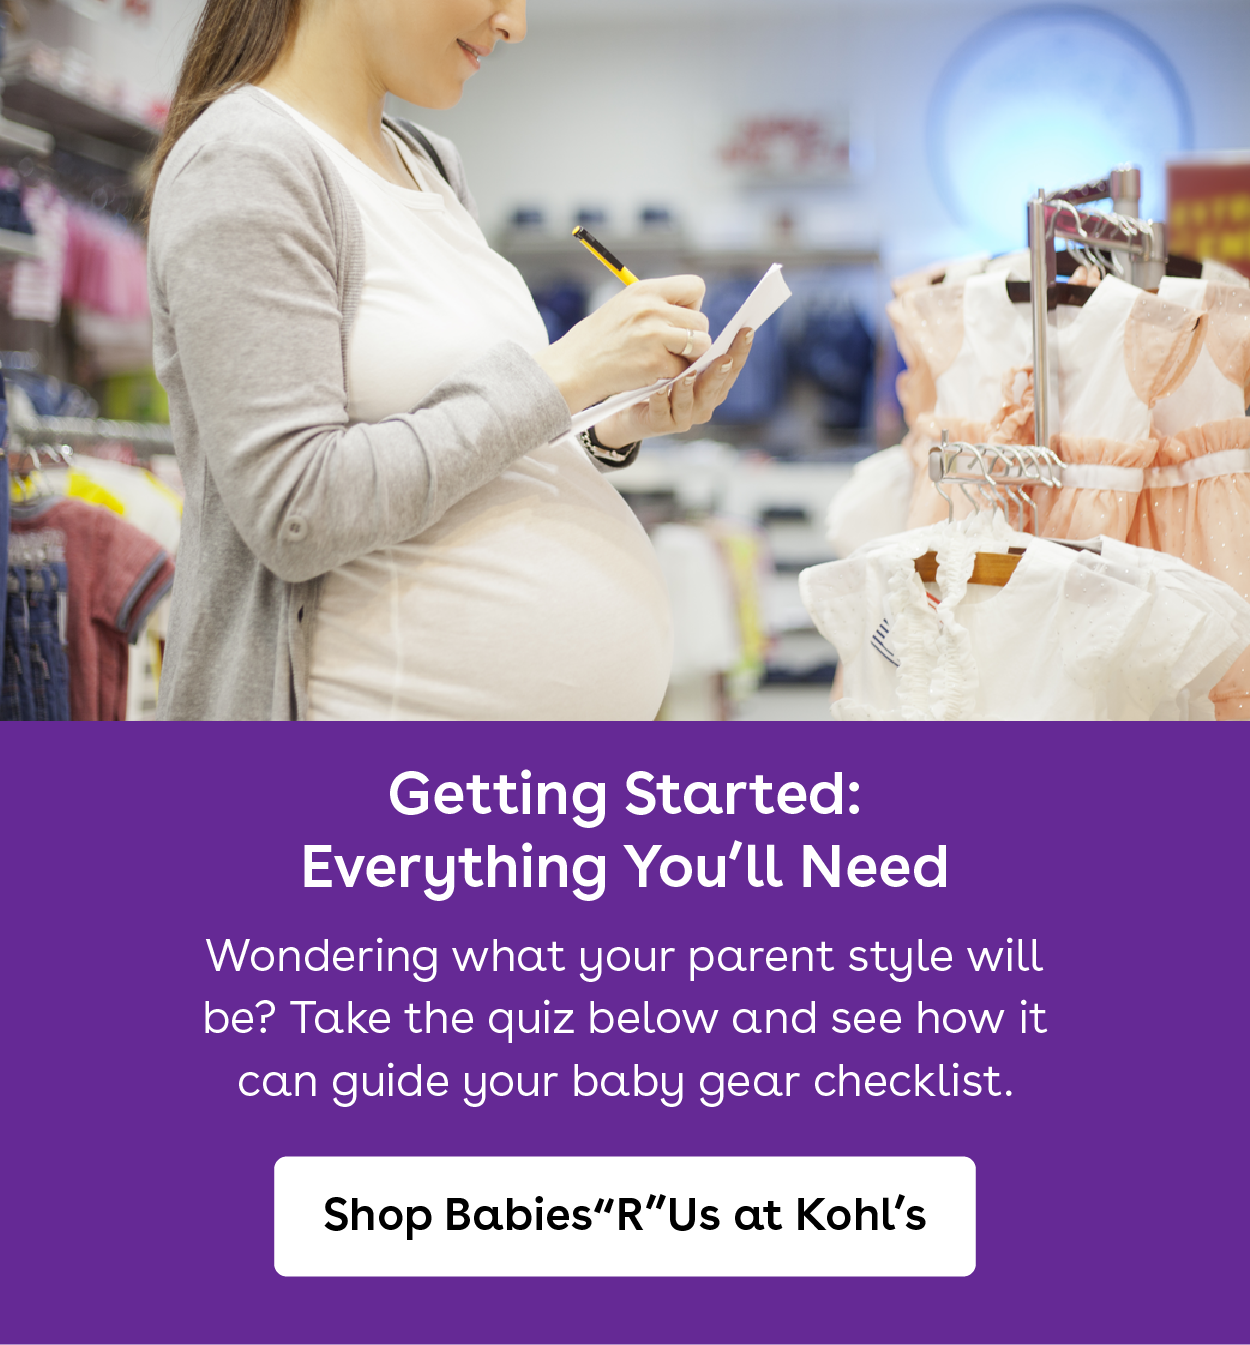 Getting started. Everything you will need. Wondering what your parent style will be.. take the quiz below and see how it can guide your baby gear checklist. Shop babies r us at kohls